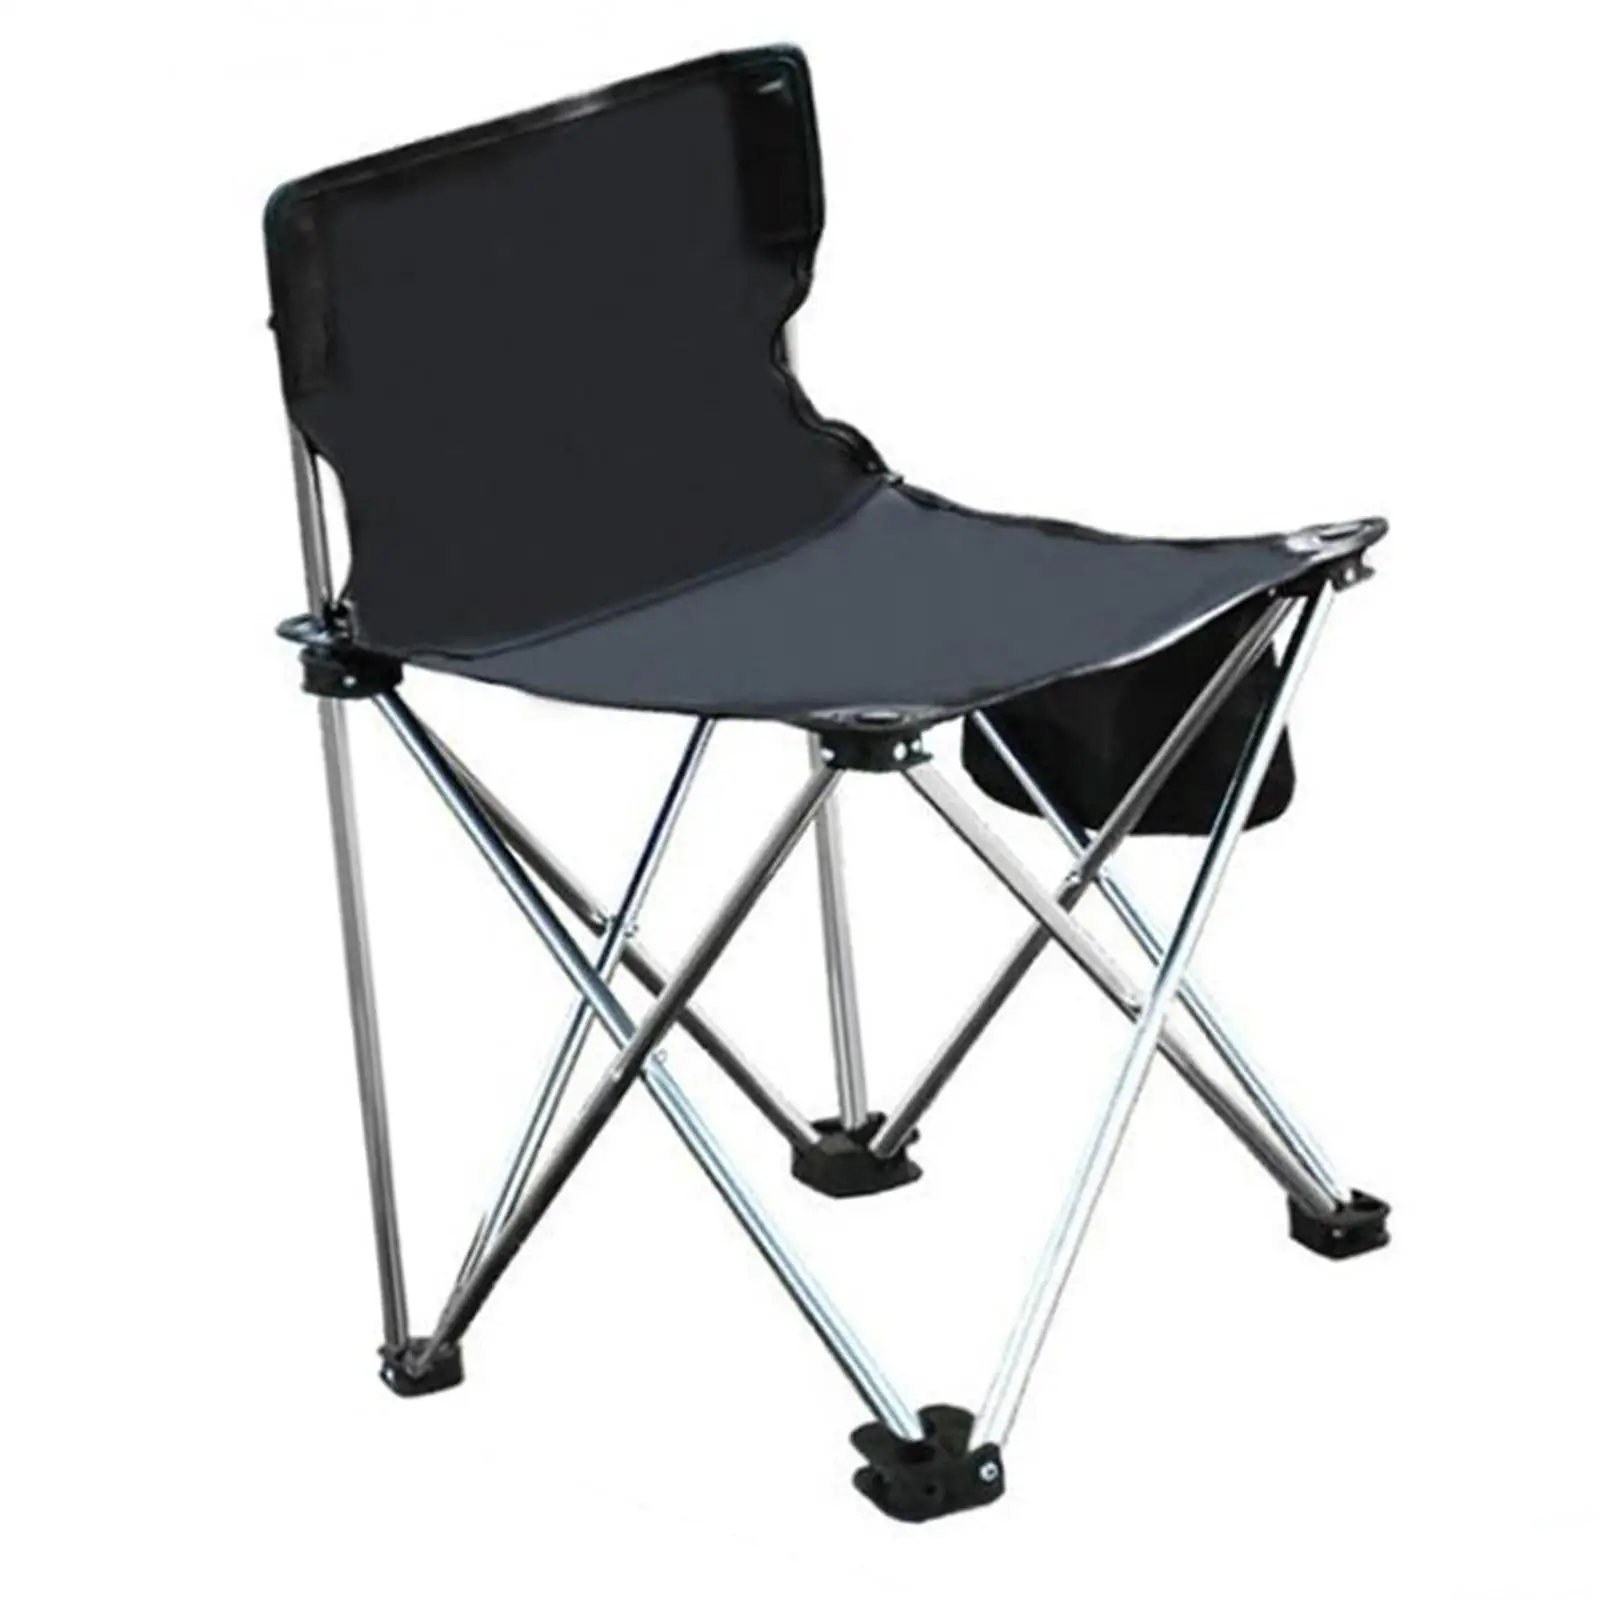 Portable Camping Chair with Side Pocket Holds 330lbs Heavy Duty Fishing Chair